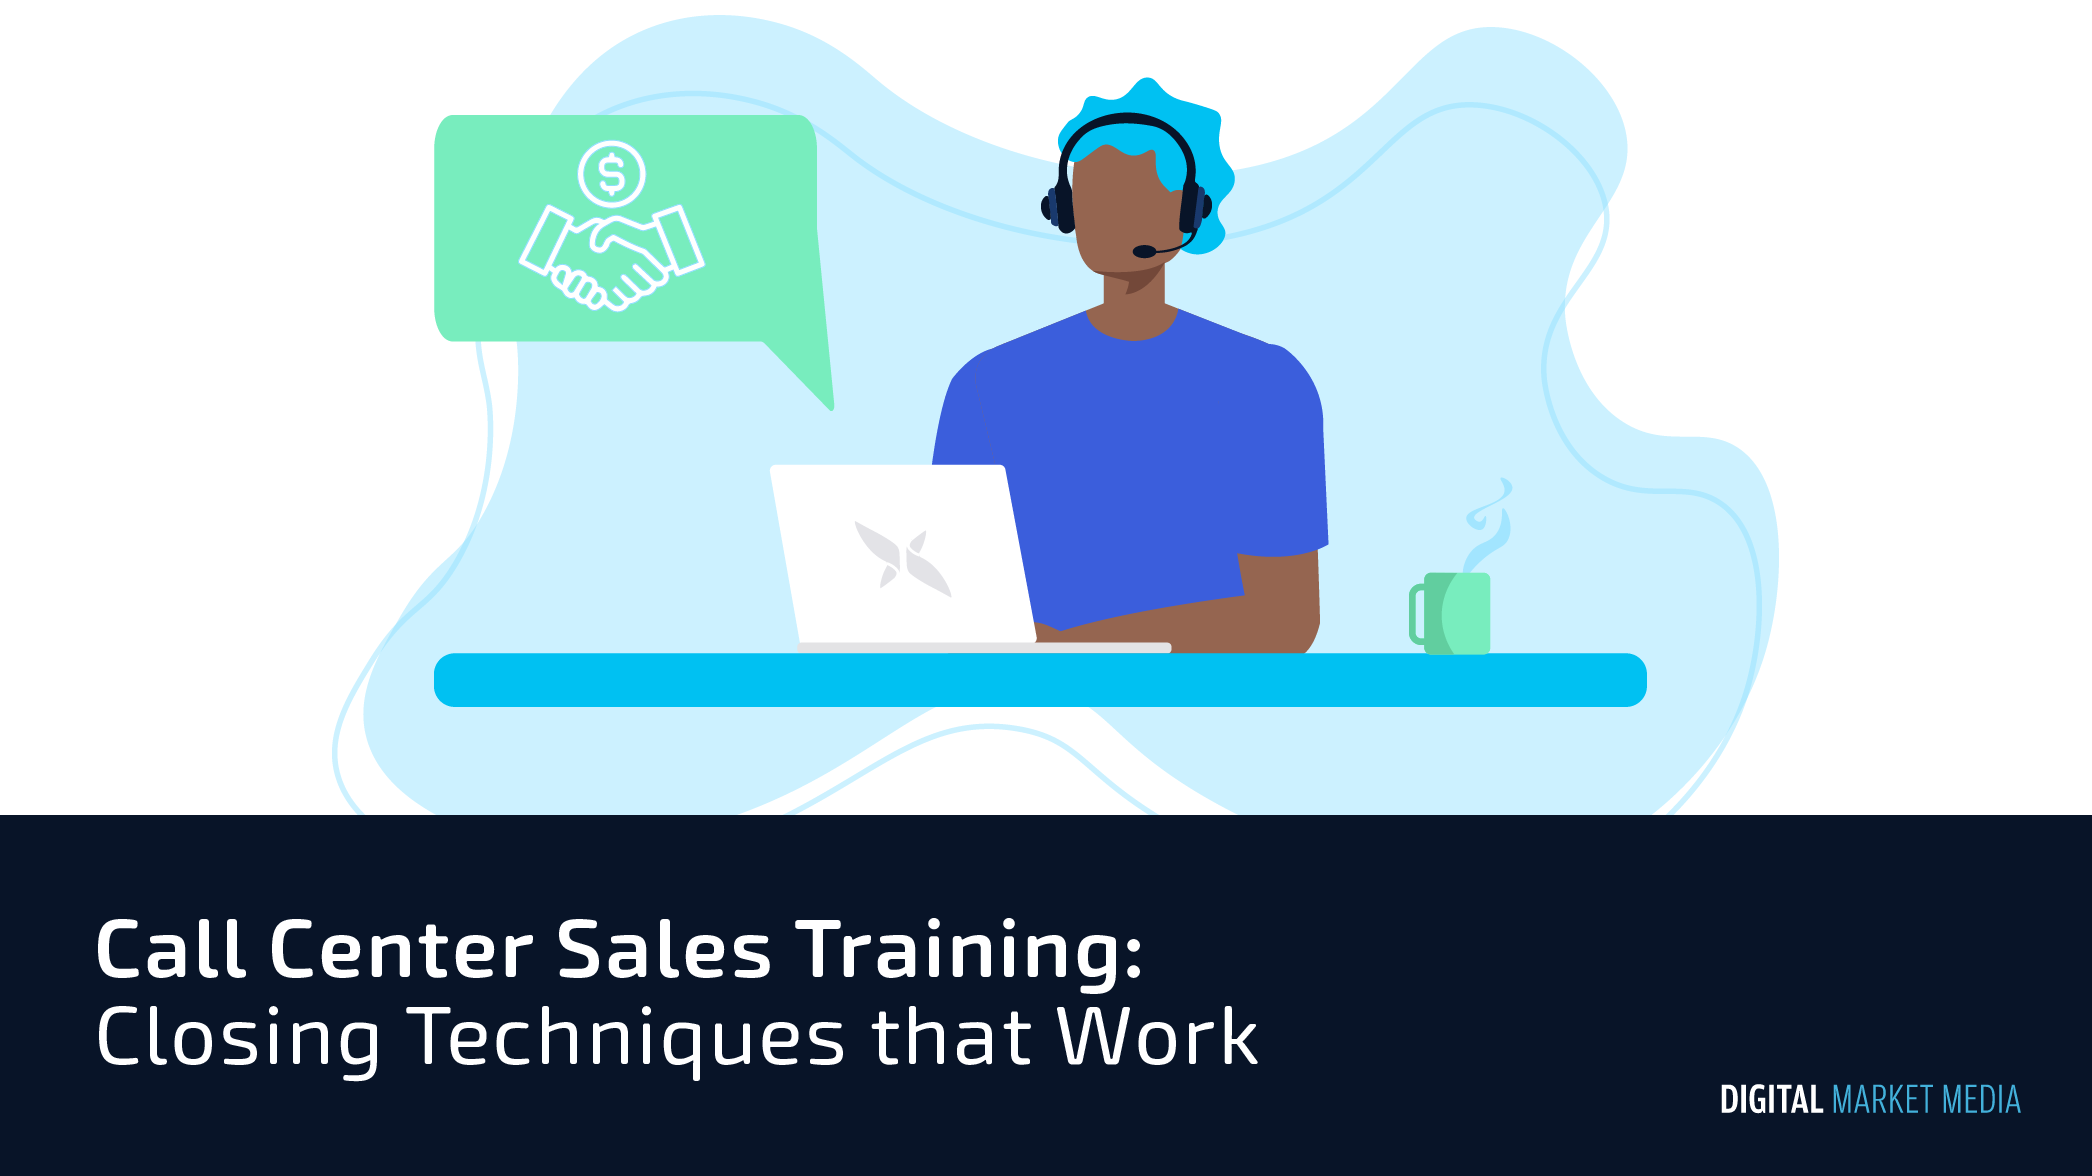 Call Center Sales Training: Closing Techniques That Work